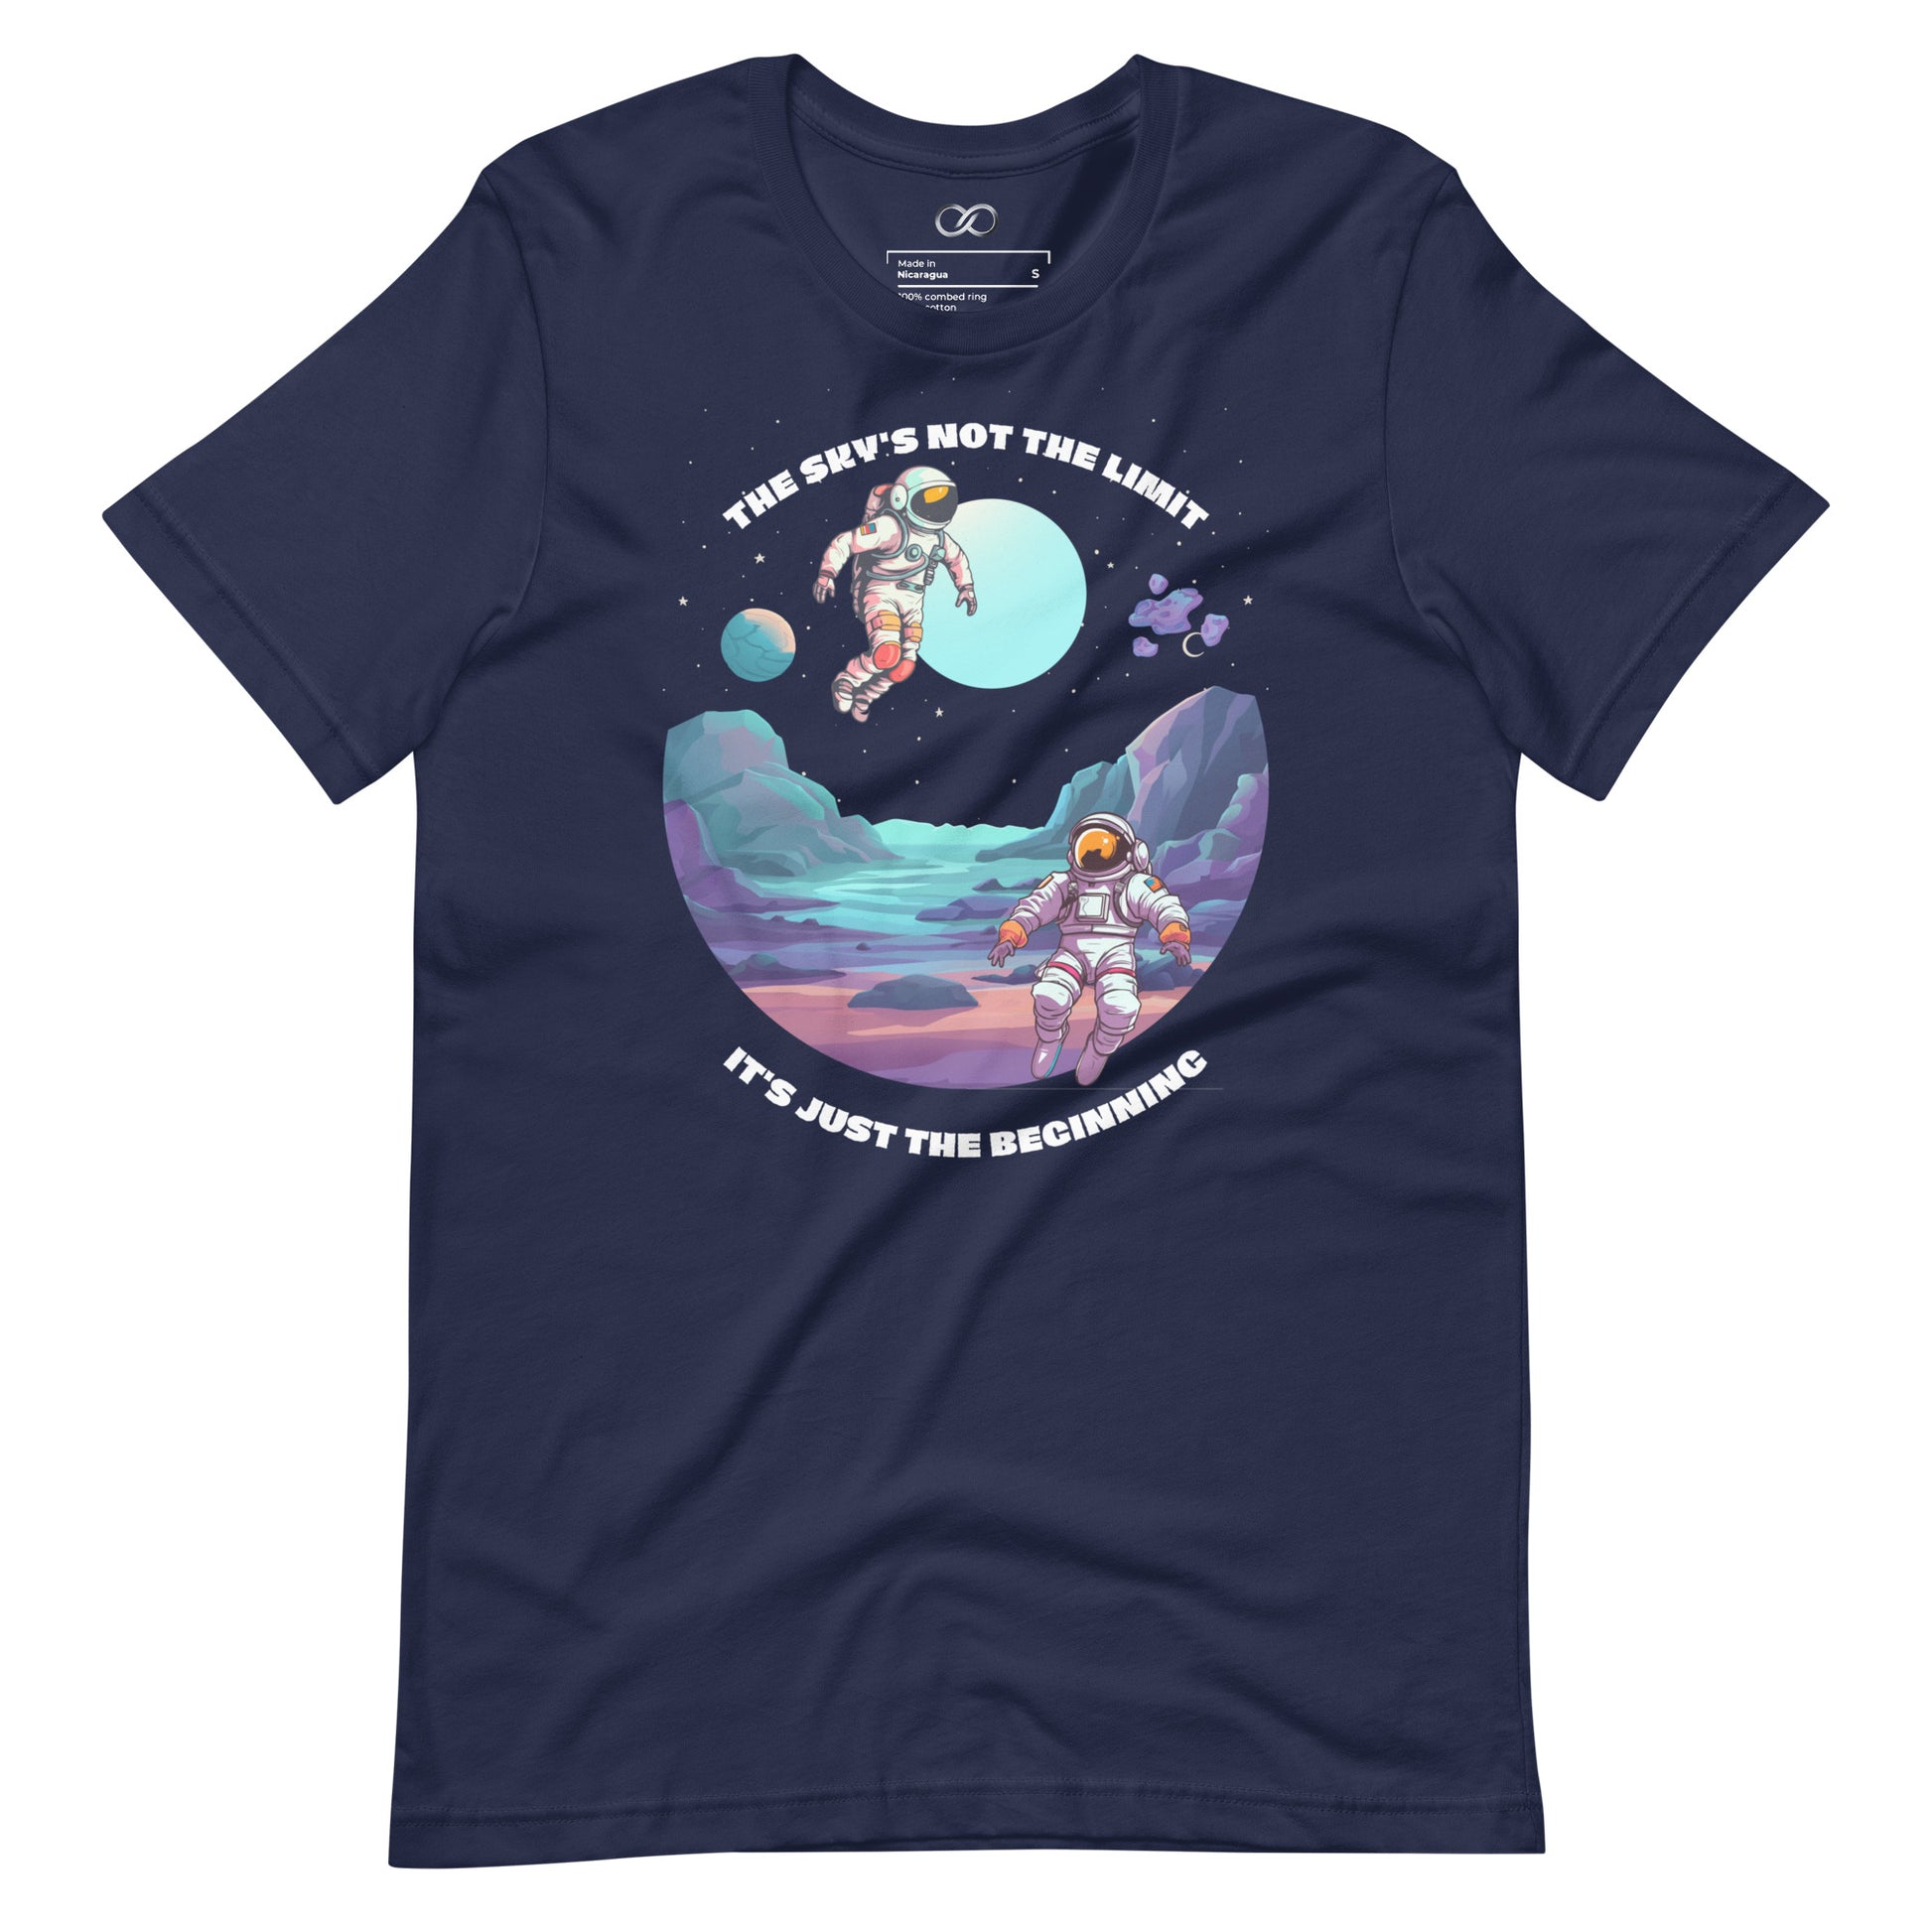 Navy relaxed-fit t-shirt with a humorous space-themed graphic design and statement, crafted from soft cotton for ultimate comfort.